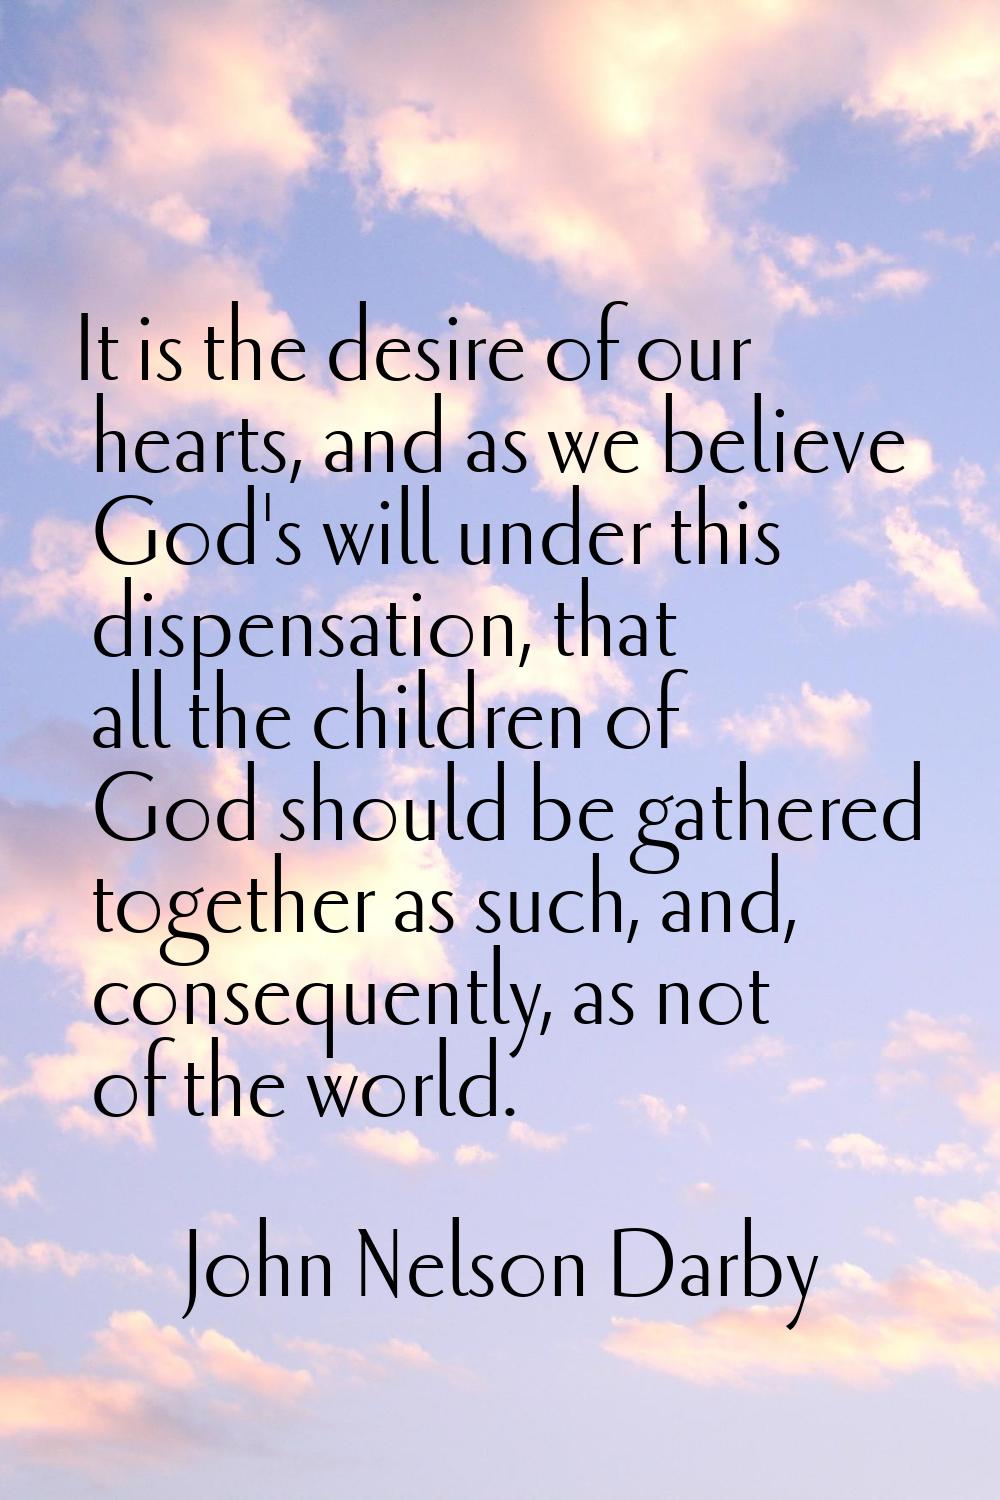 It is the desire of our hearts, and as we believe God's will under this dispensation, that all the 